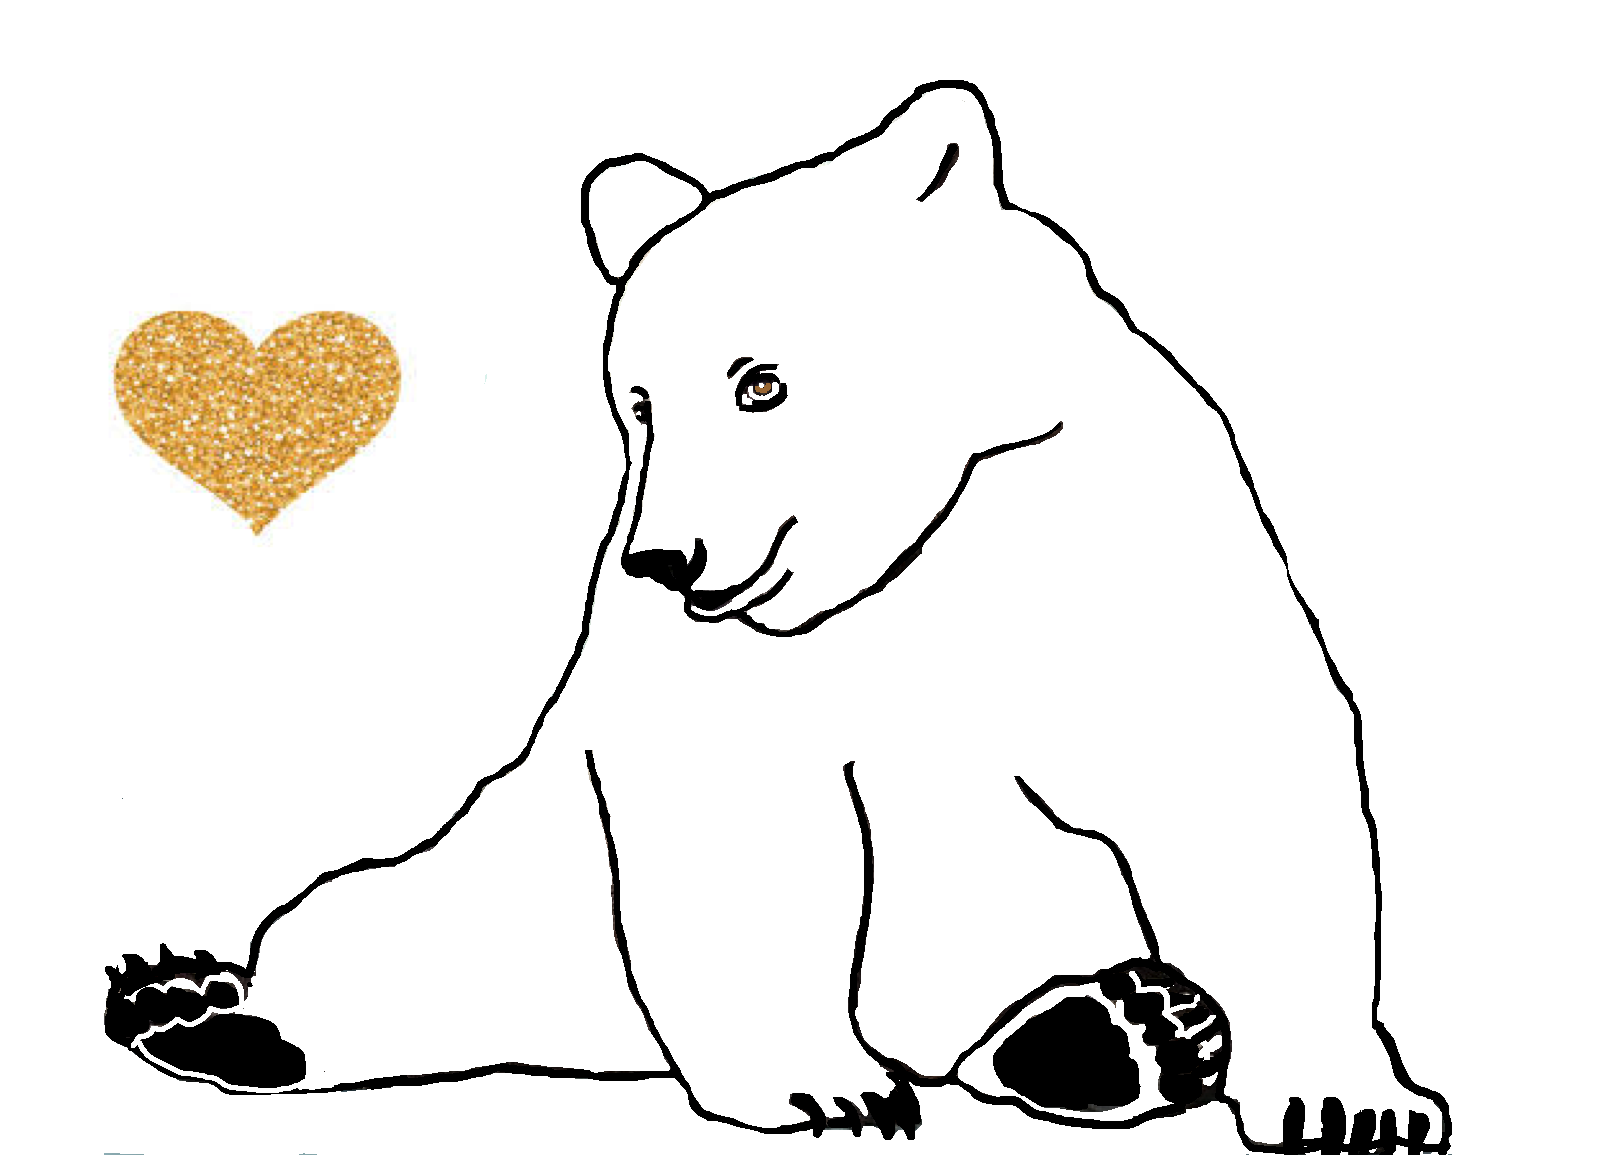 HeartofGold.png